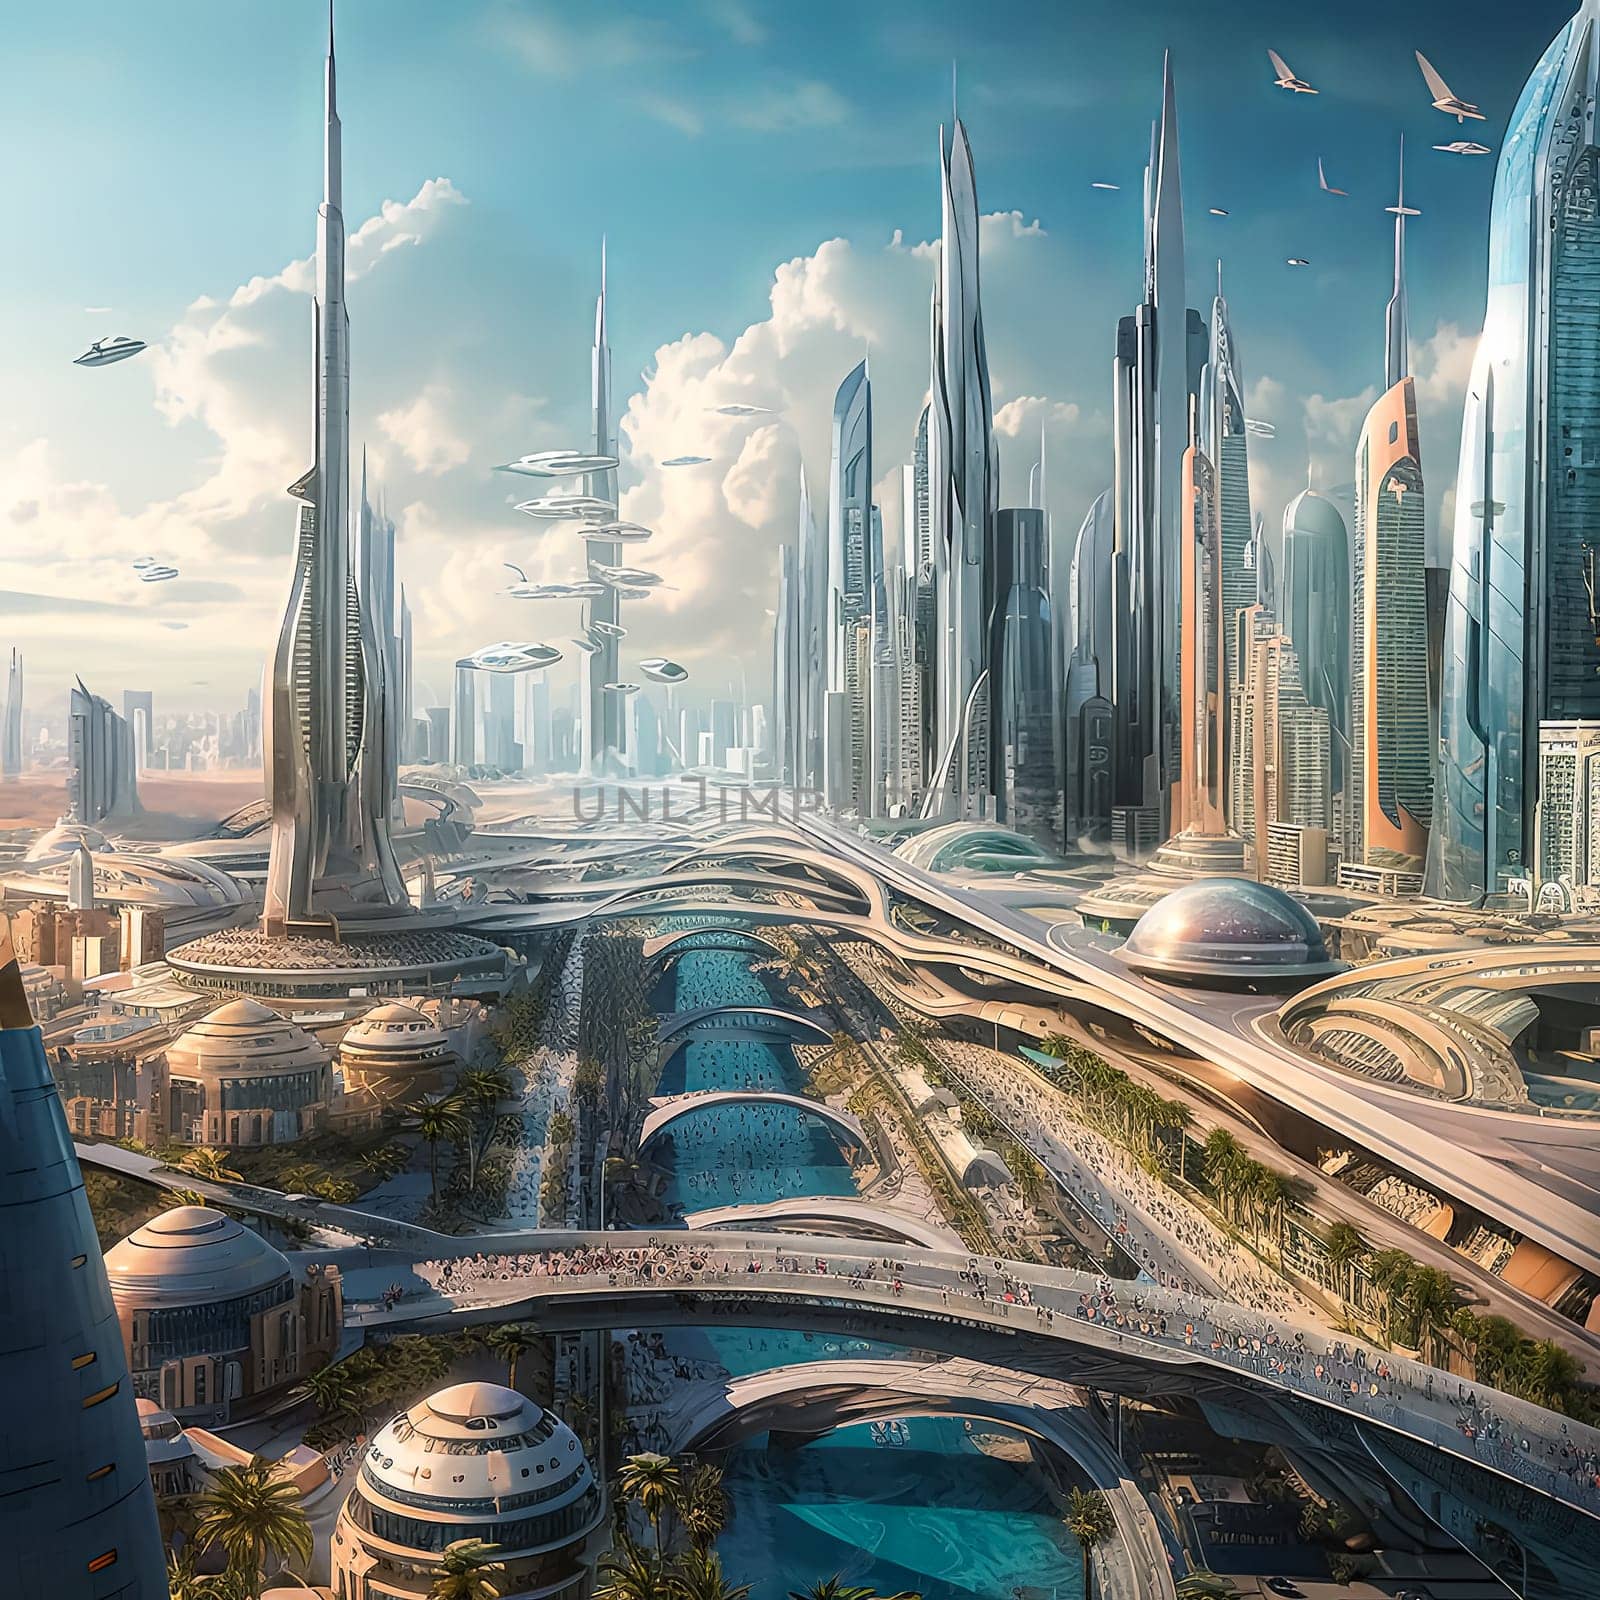 A futuristic cityscape with tall buildings and a river running through it. The sky is blue and there are many people walking around